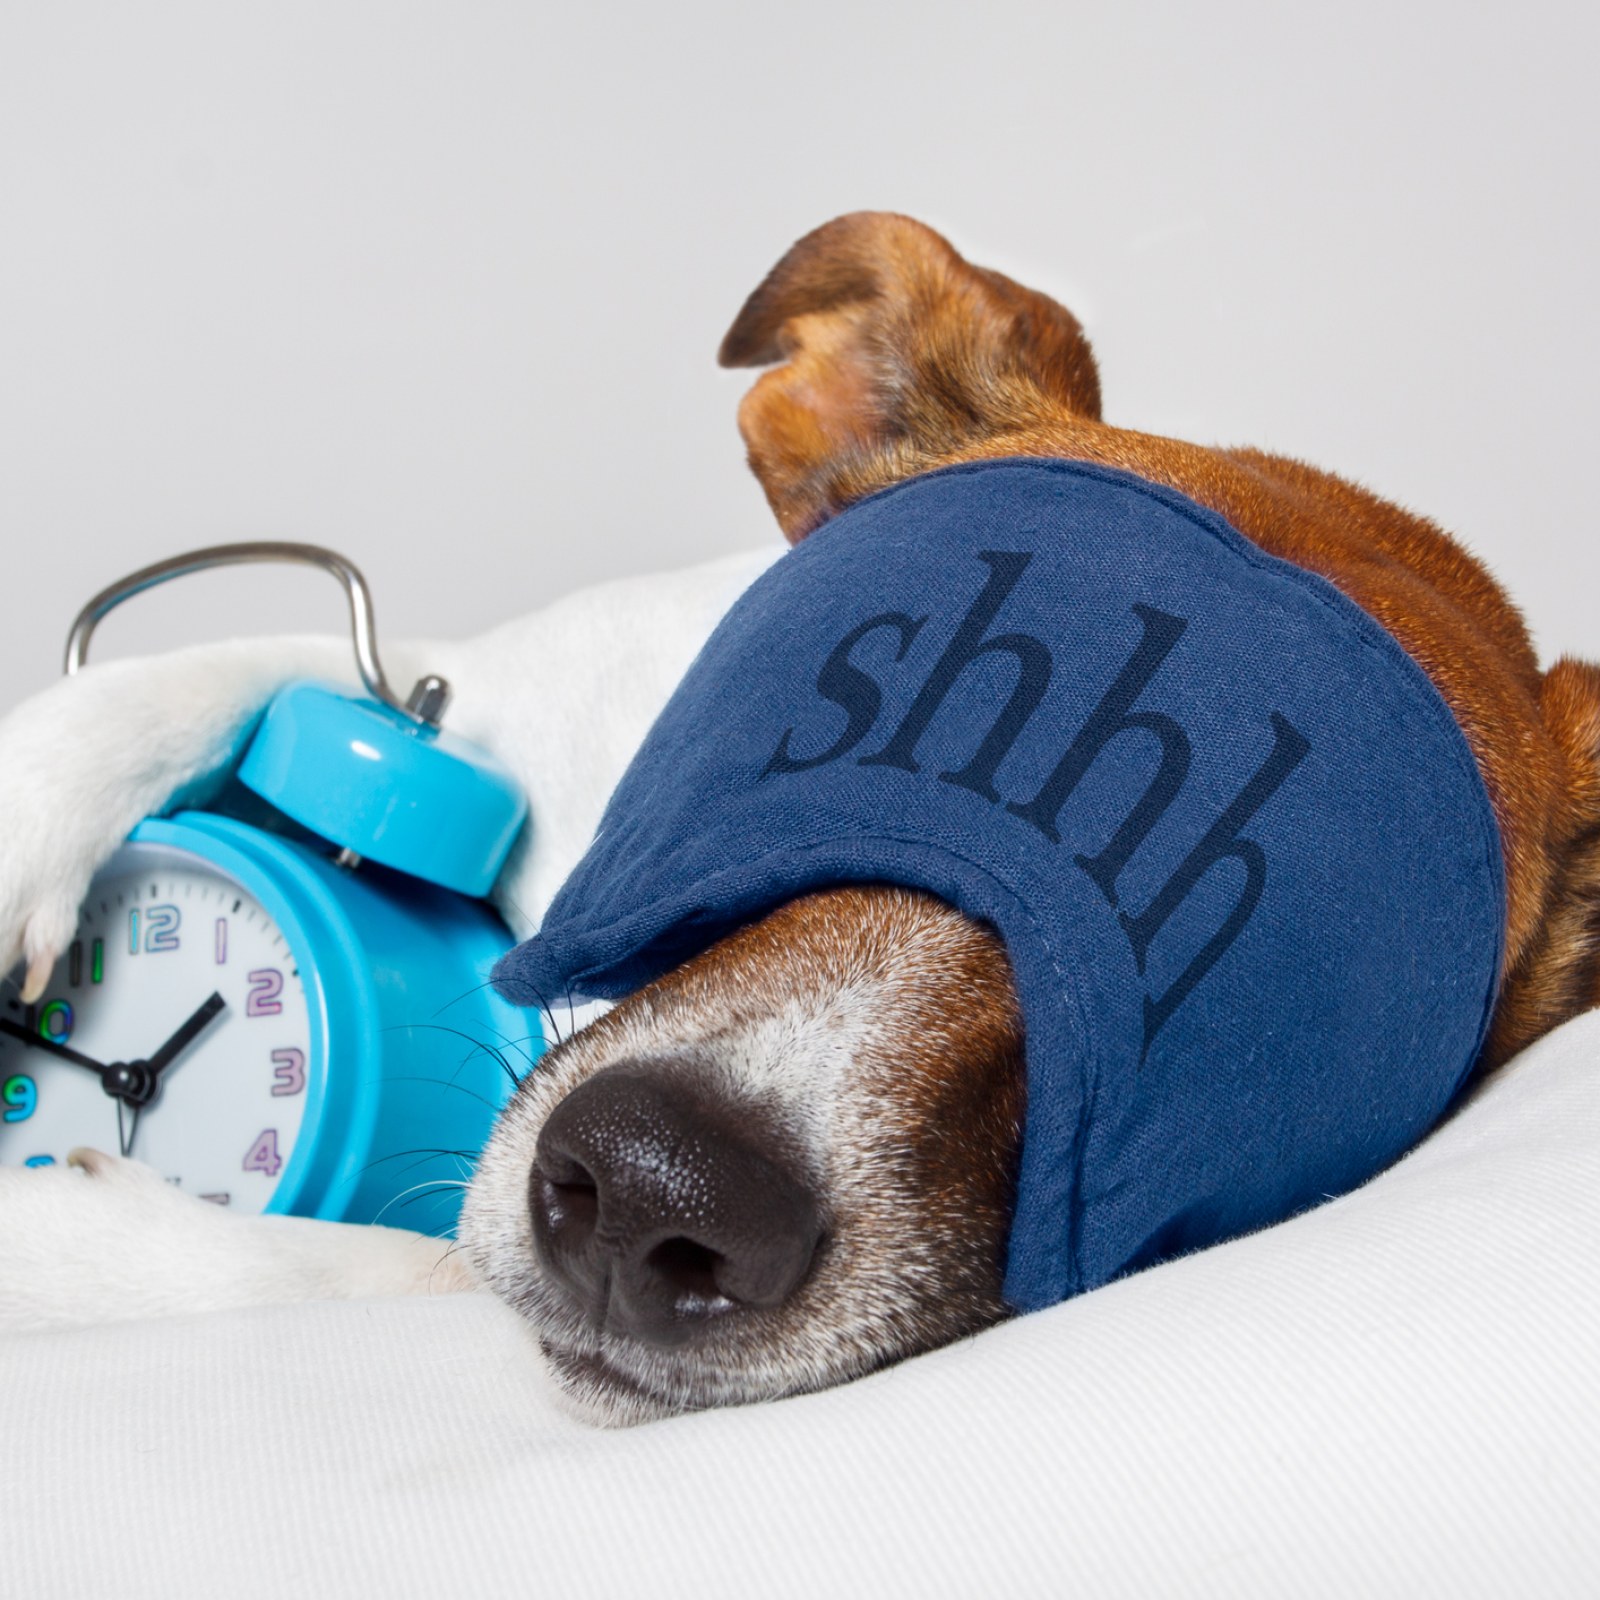 Why Do Dogs Sleep So Much? How Many Hours of Sleep Dogs Need Per Day